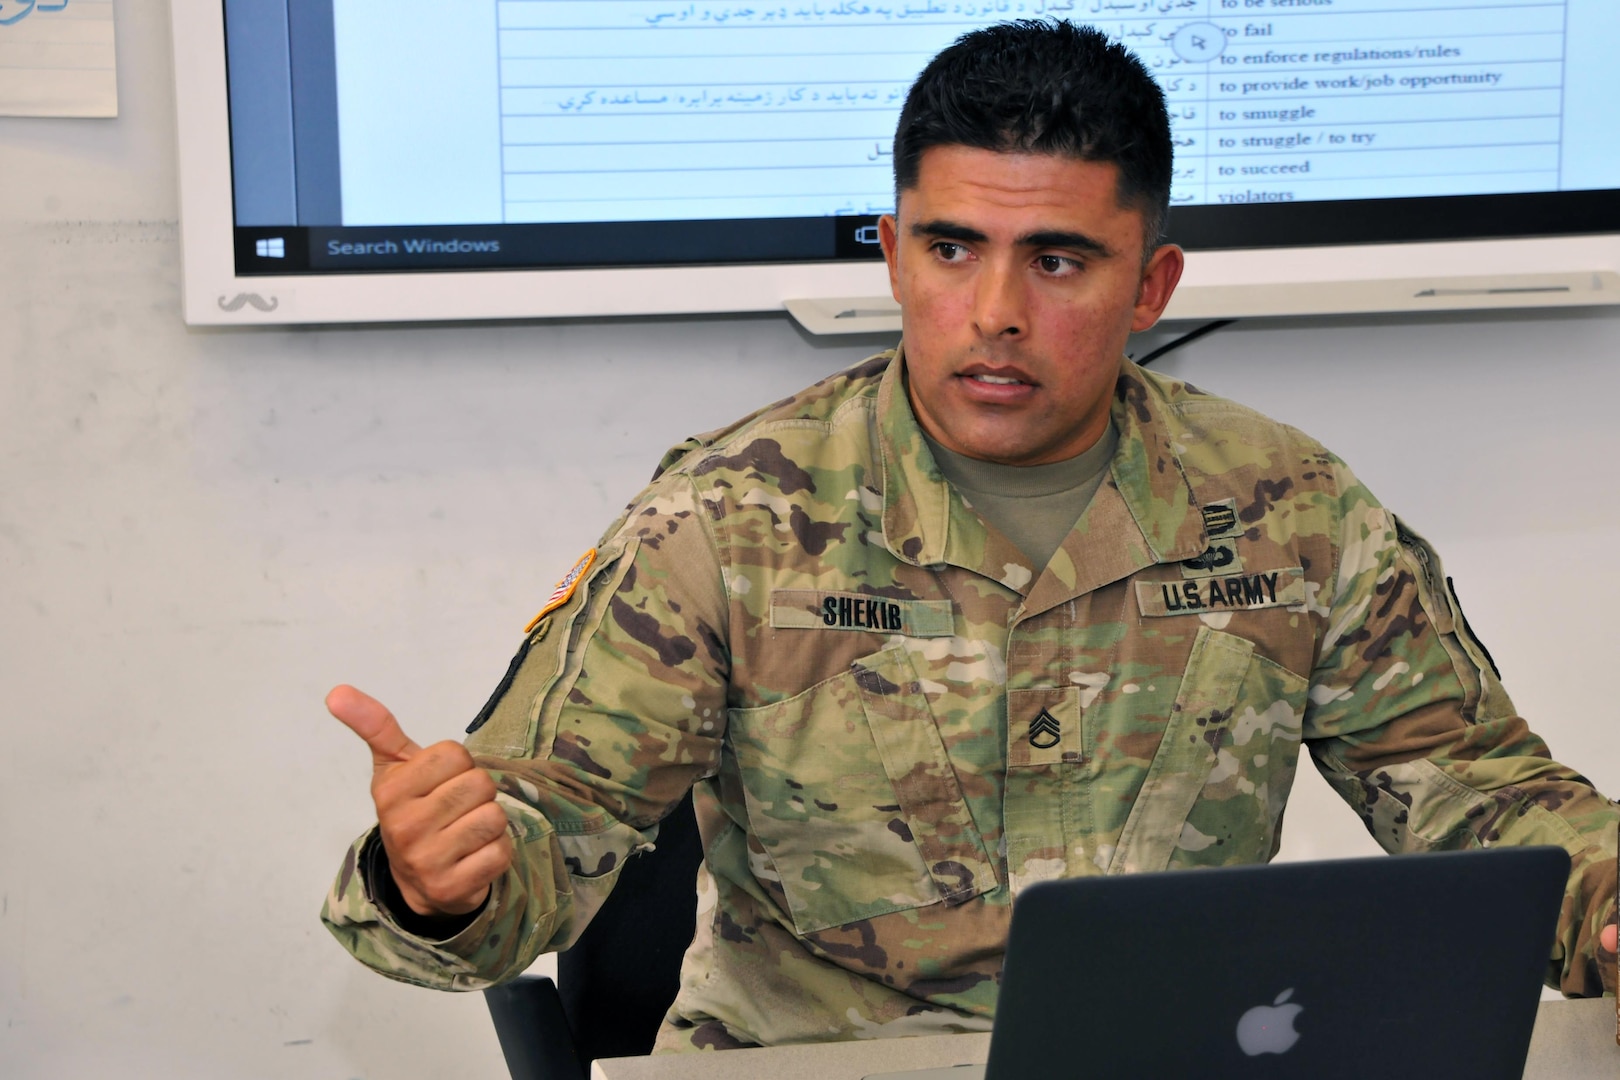 Staff Sgt. Mashal Shekib, a Military Language Instructor at the Defense Language Institute Foreign Language Center, Presidio of Monterey, California, teaches a Pashto class Nov. 3, 2017. Originally from Kabul, he immigrated to the U.S. in 2008 and enlisted in the U.S. Army in 2009. (U.S. Army photo by Patrick Bray/Released)